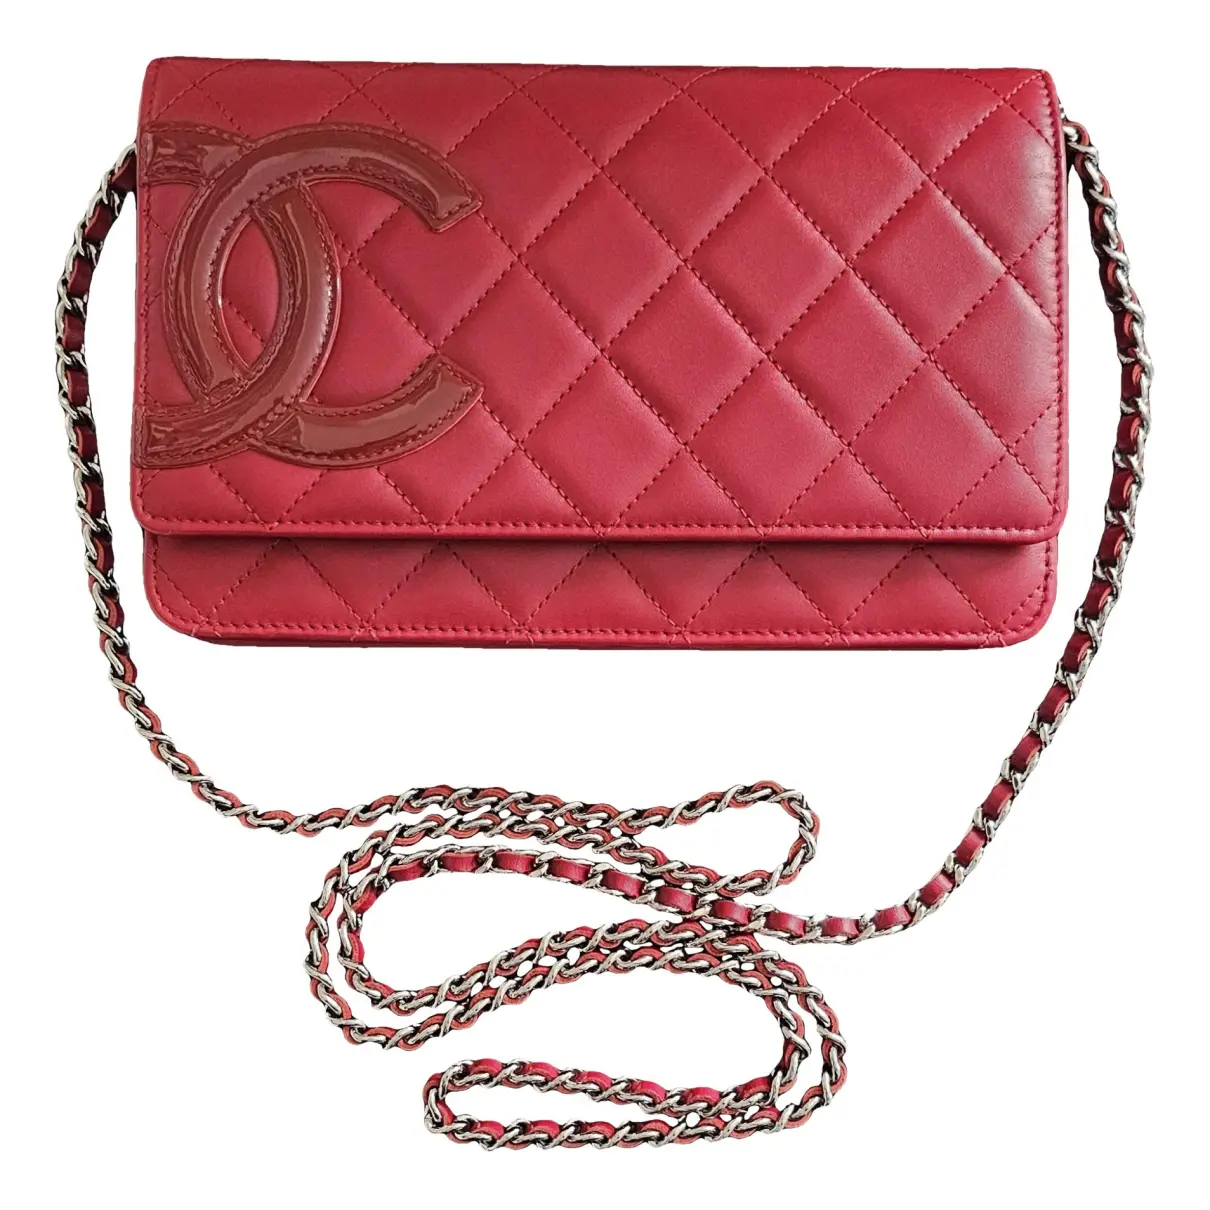 Wallet On Chain Cambon leather crossbody bag